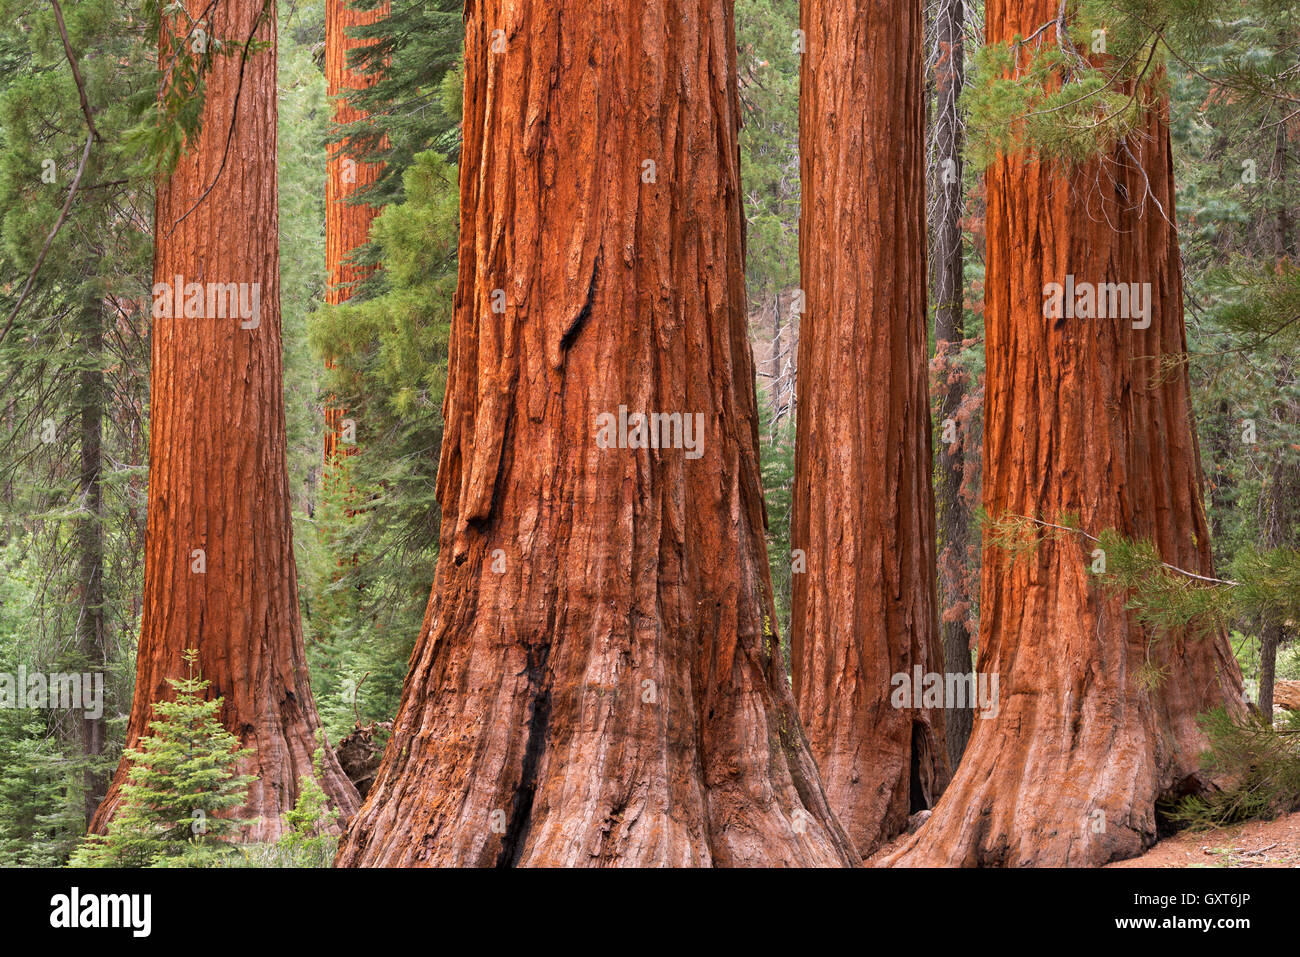 Bachelor and Three Graces Sequoia trees in Mariposa Grove, Yosemite National Park, USA. Spring (June) 2015. Stock Photo